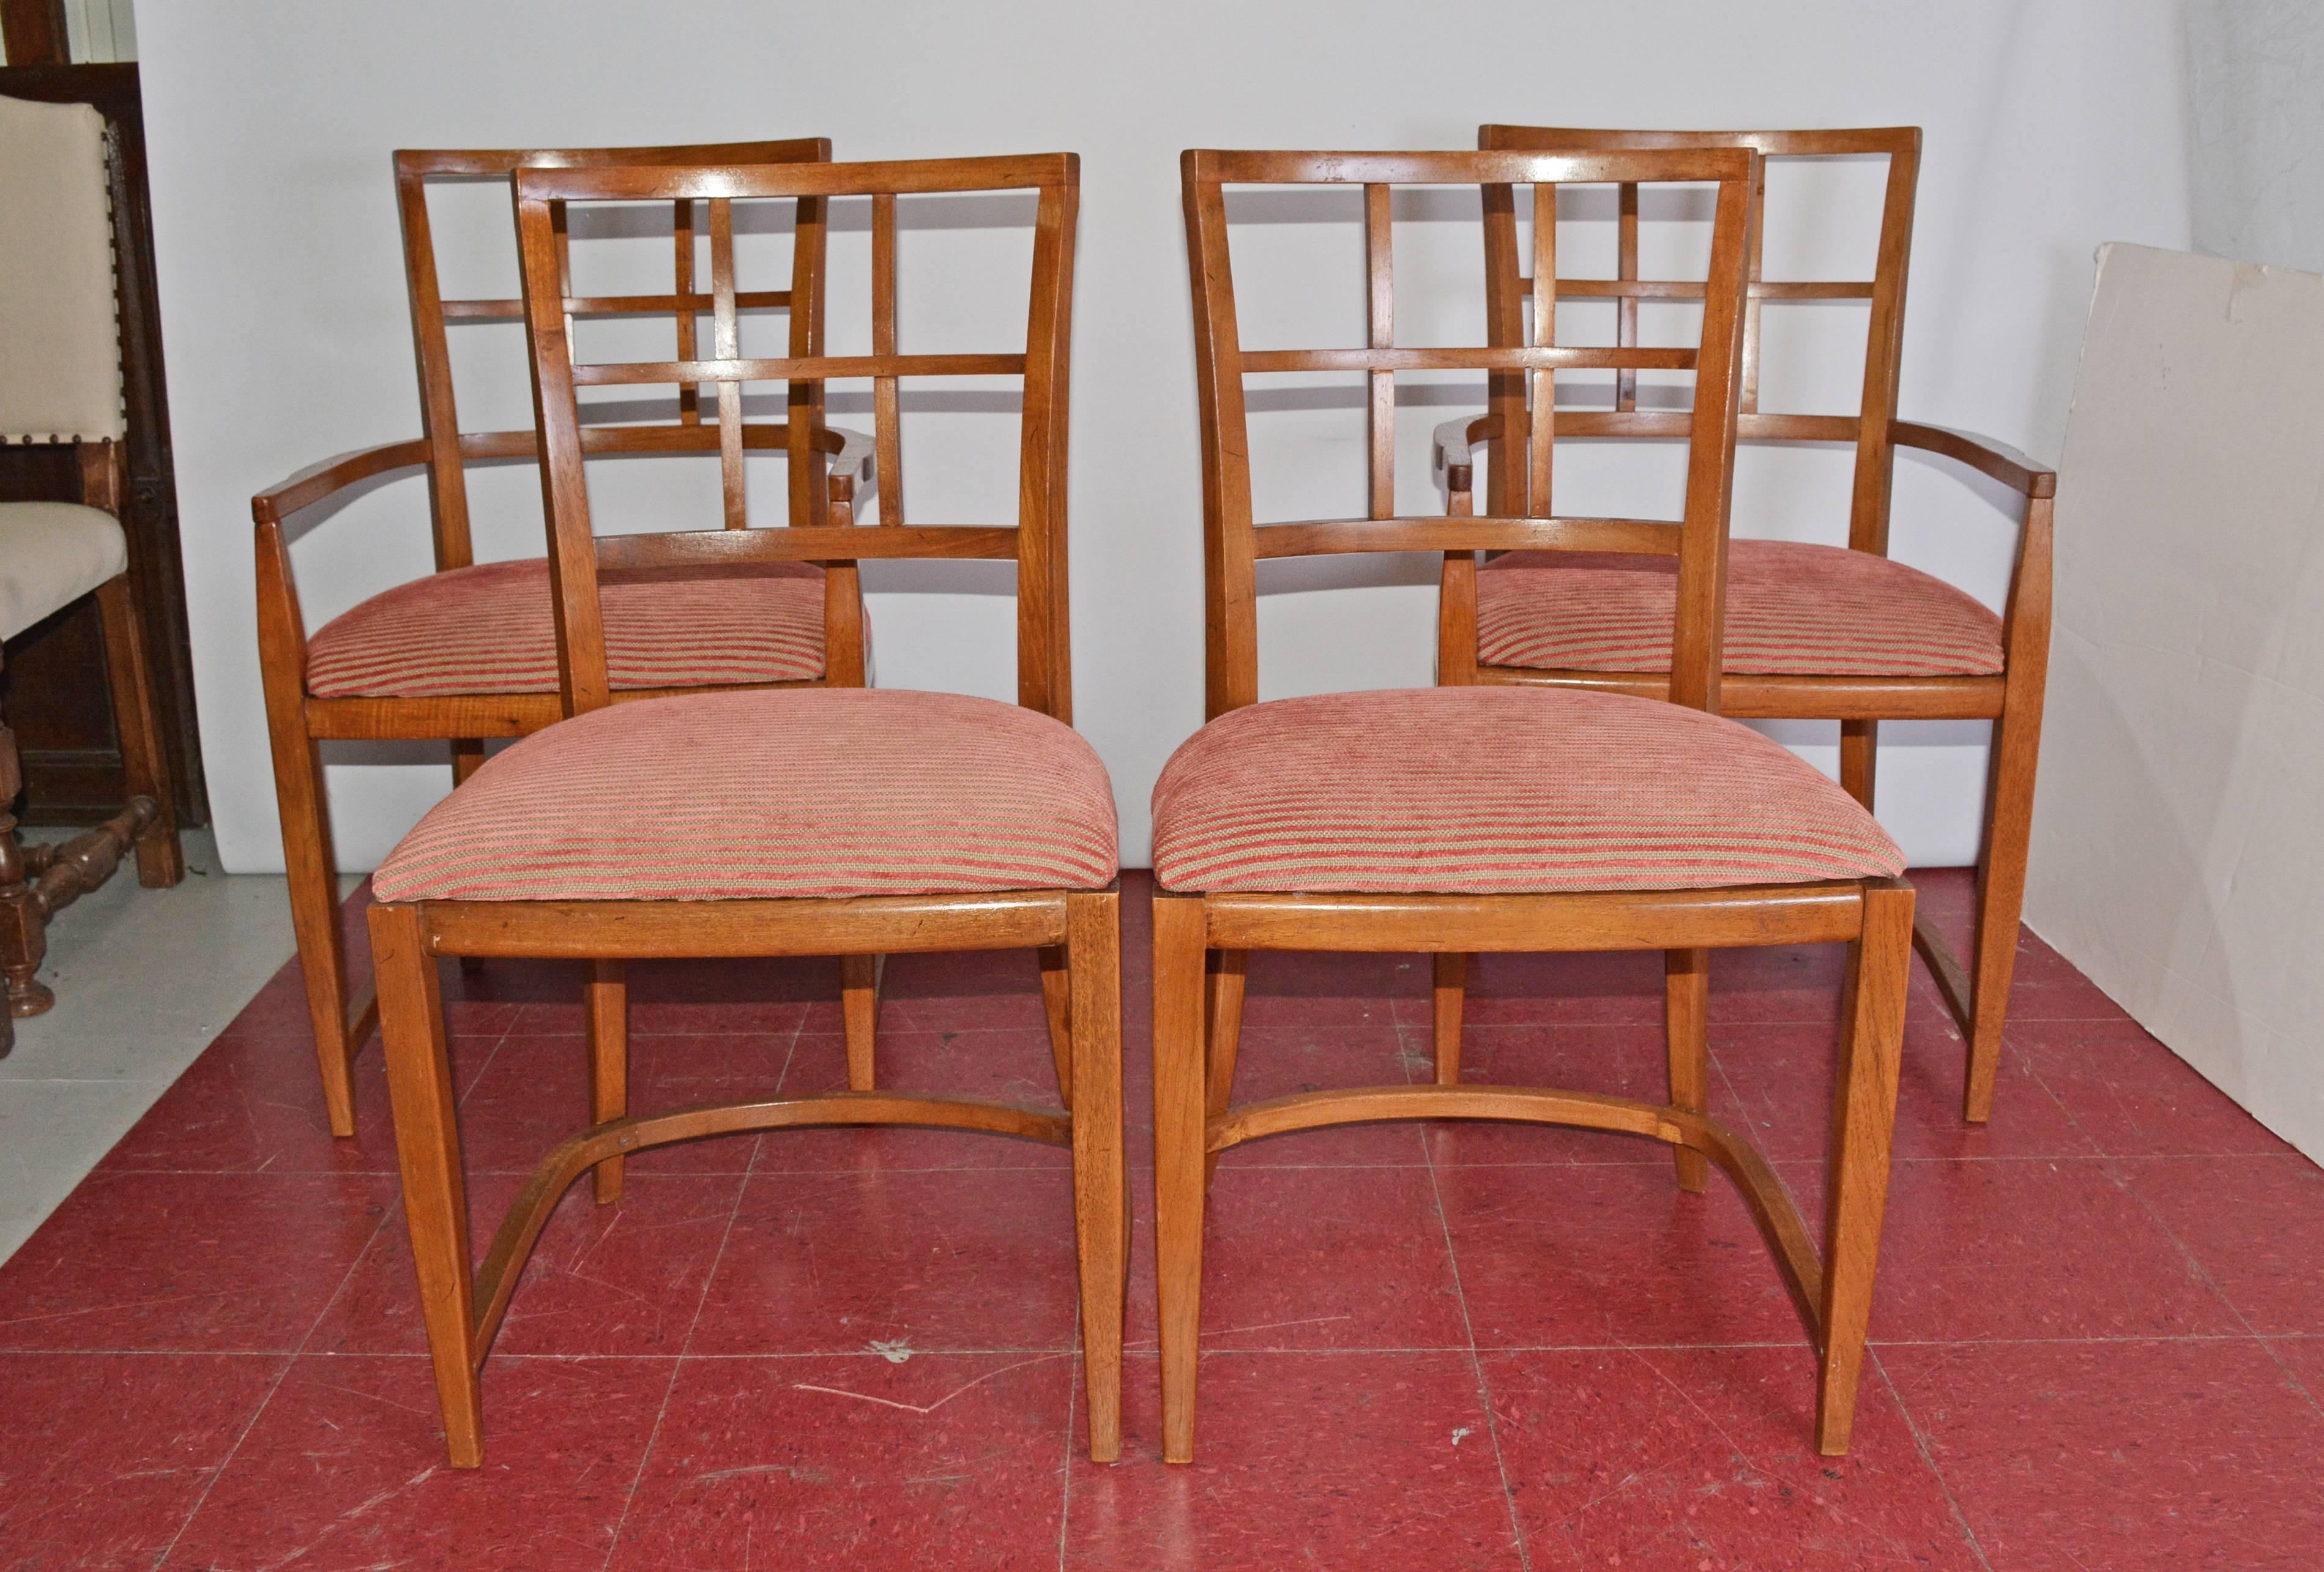 The four Art Deco dining chairs, two arm and two side, have rounded leg framing and backs. The seats are newly upholstered in ribbed red and tan striping.

Measures: Armchairs: 21